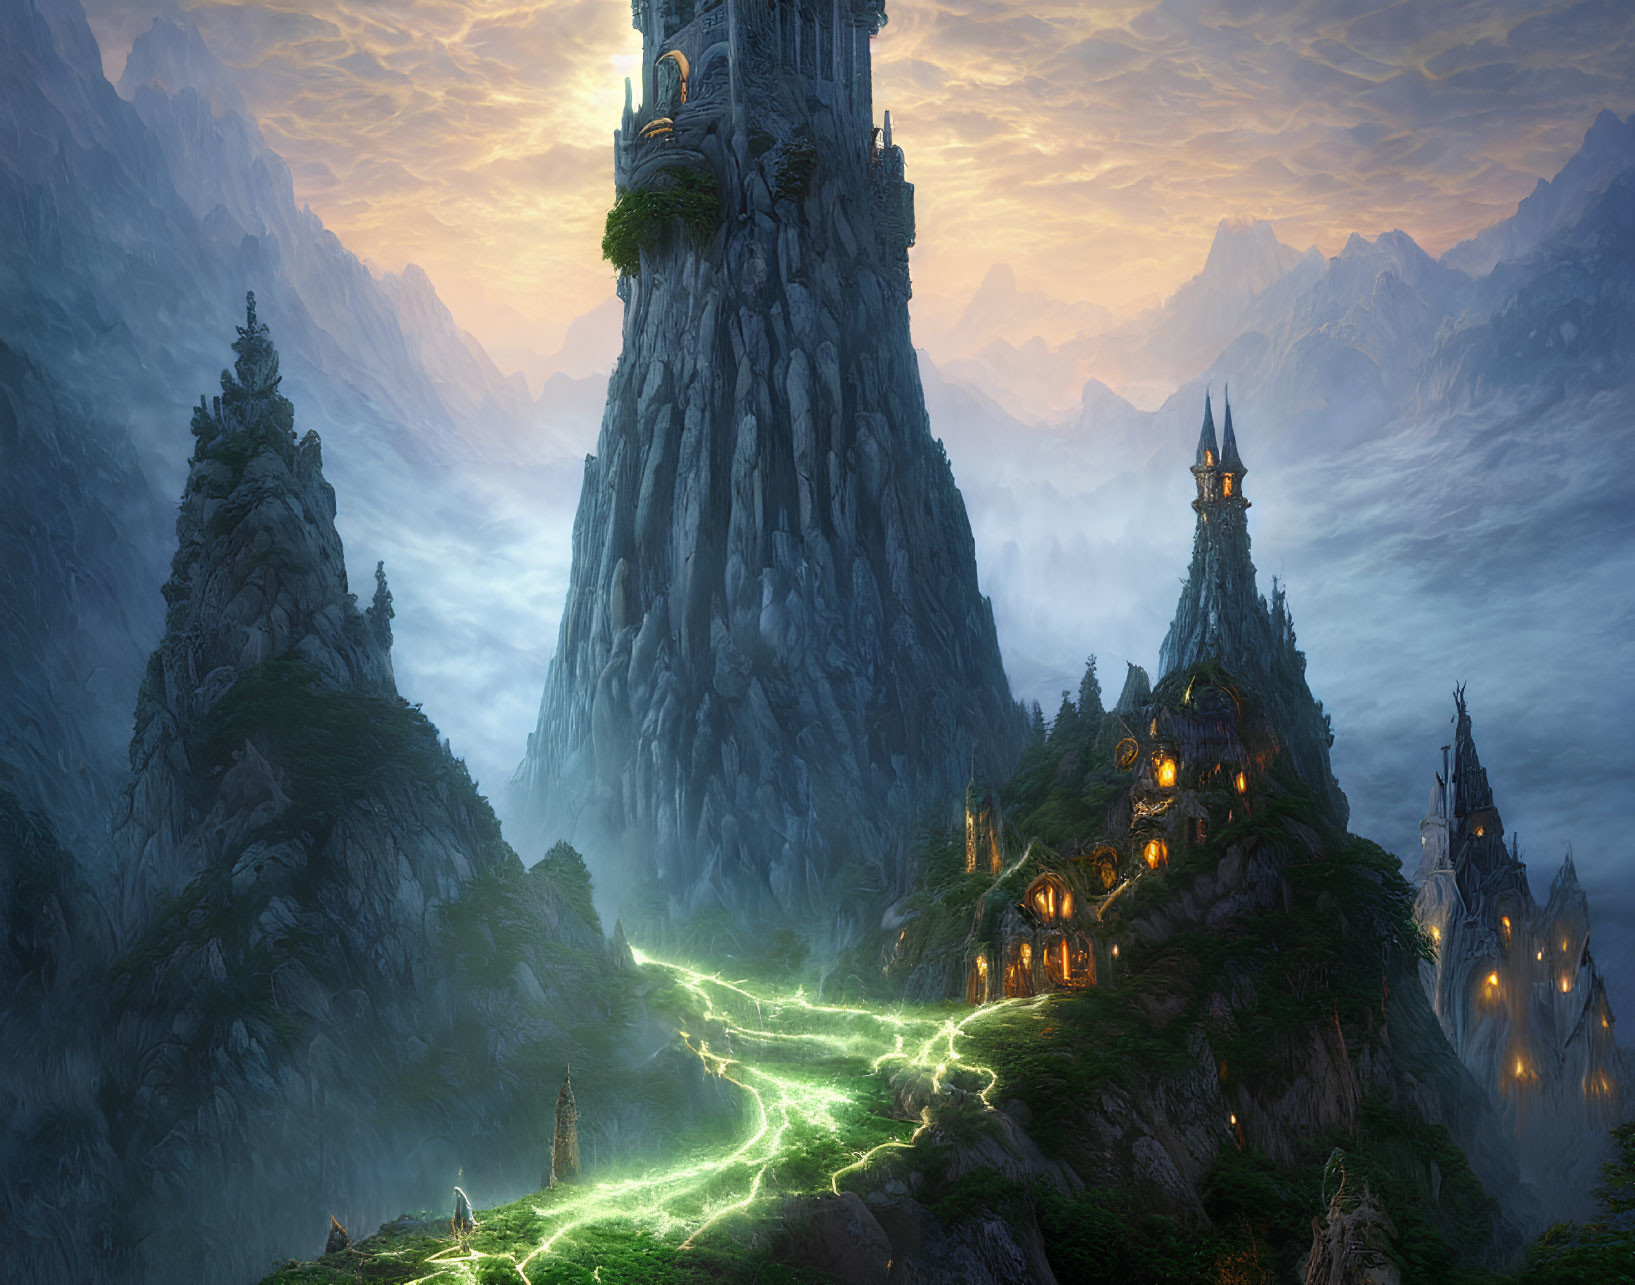 Mystical landscape with towering spire and fairy-tale structures surrounded by glowing paths.